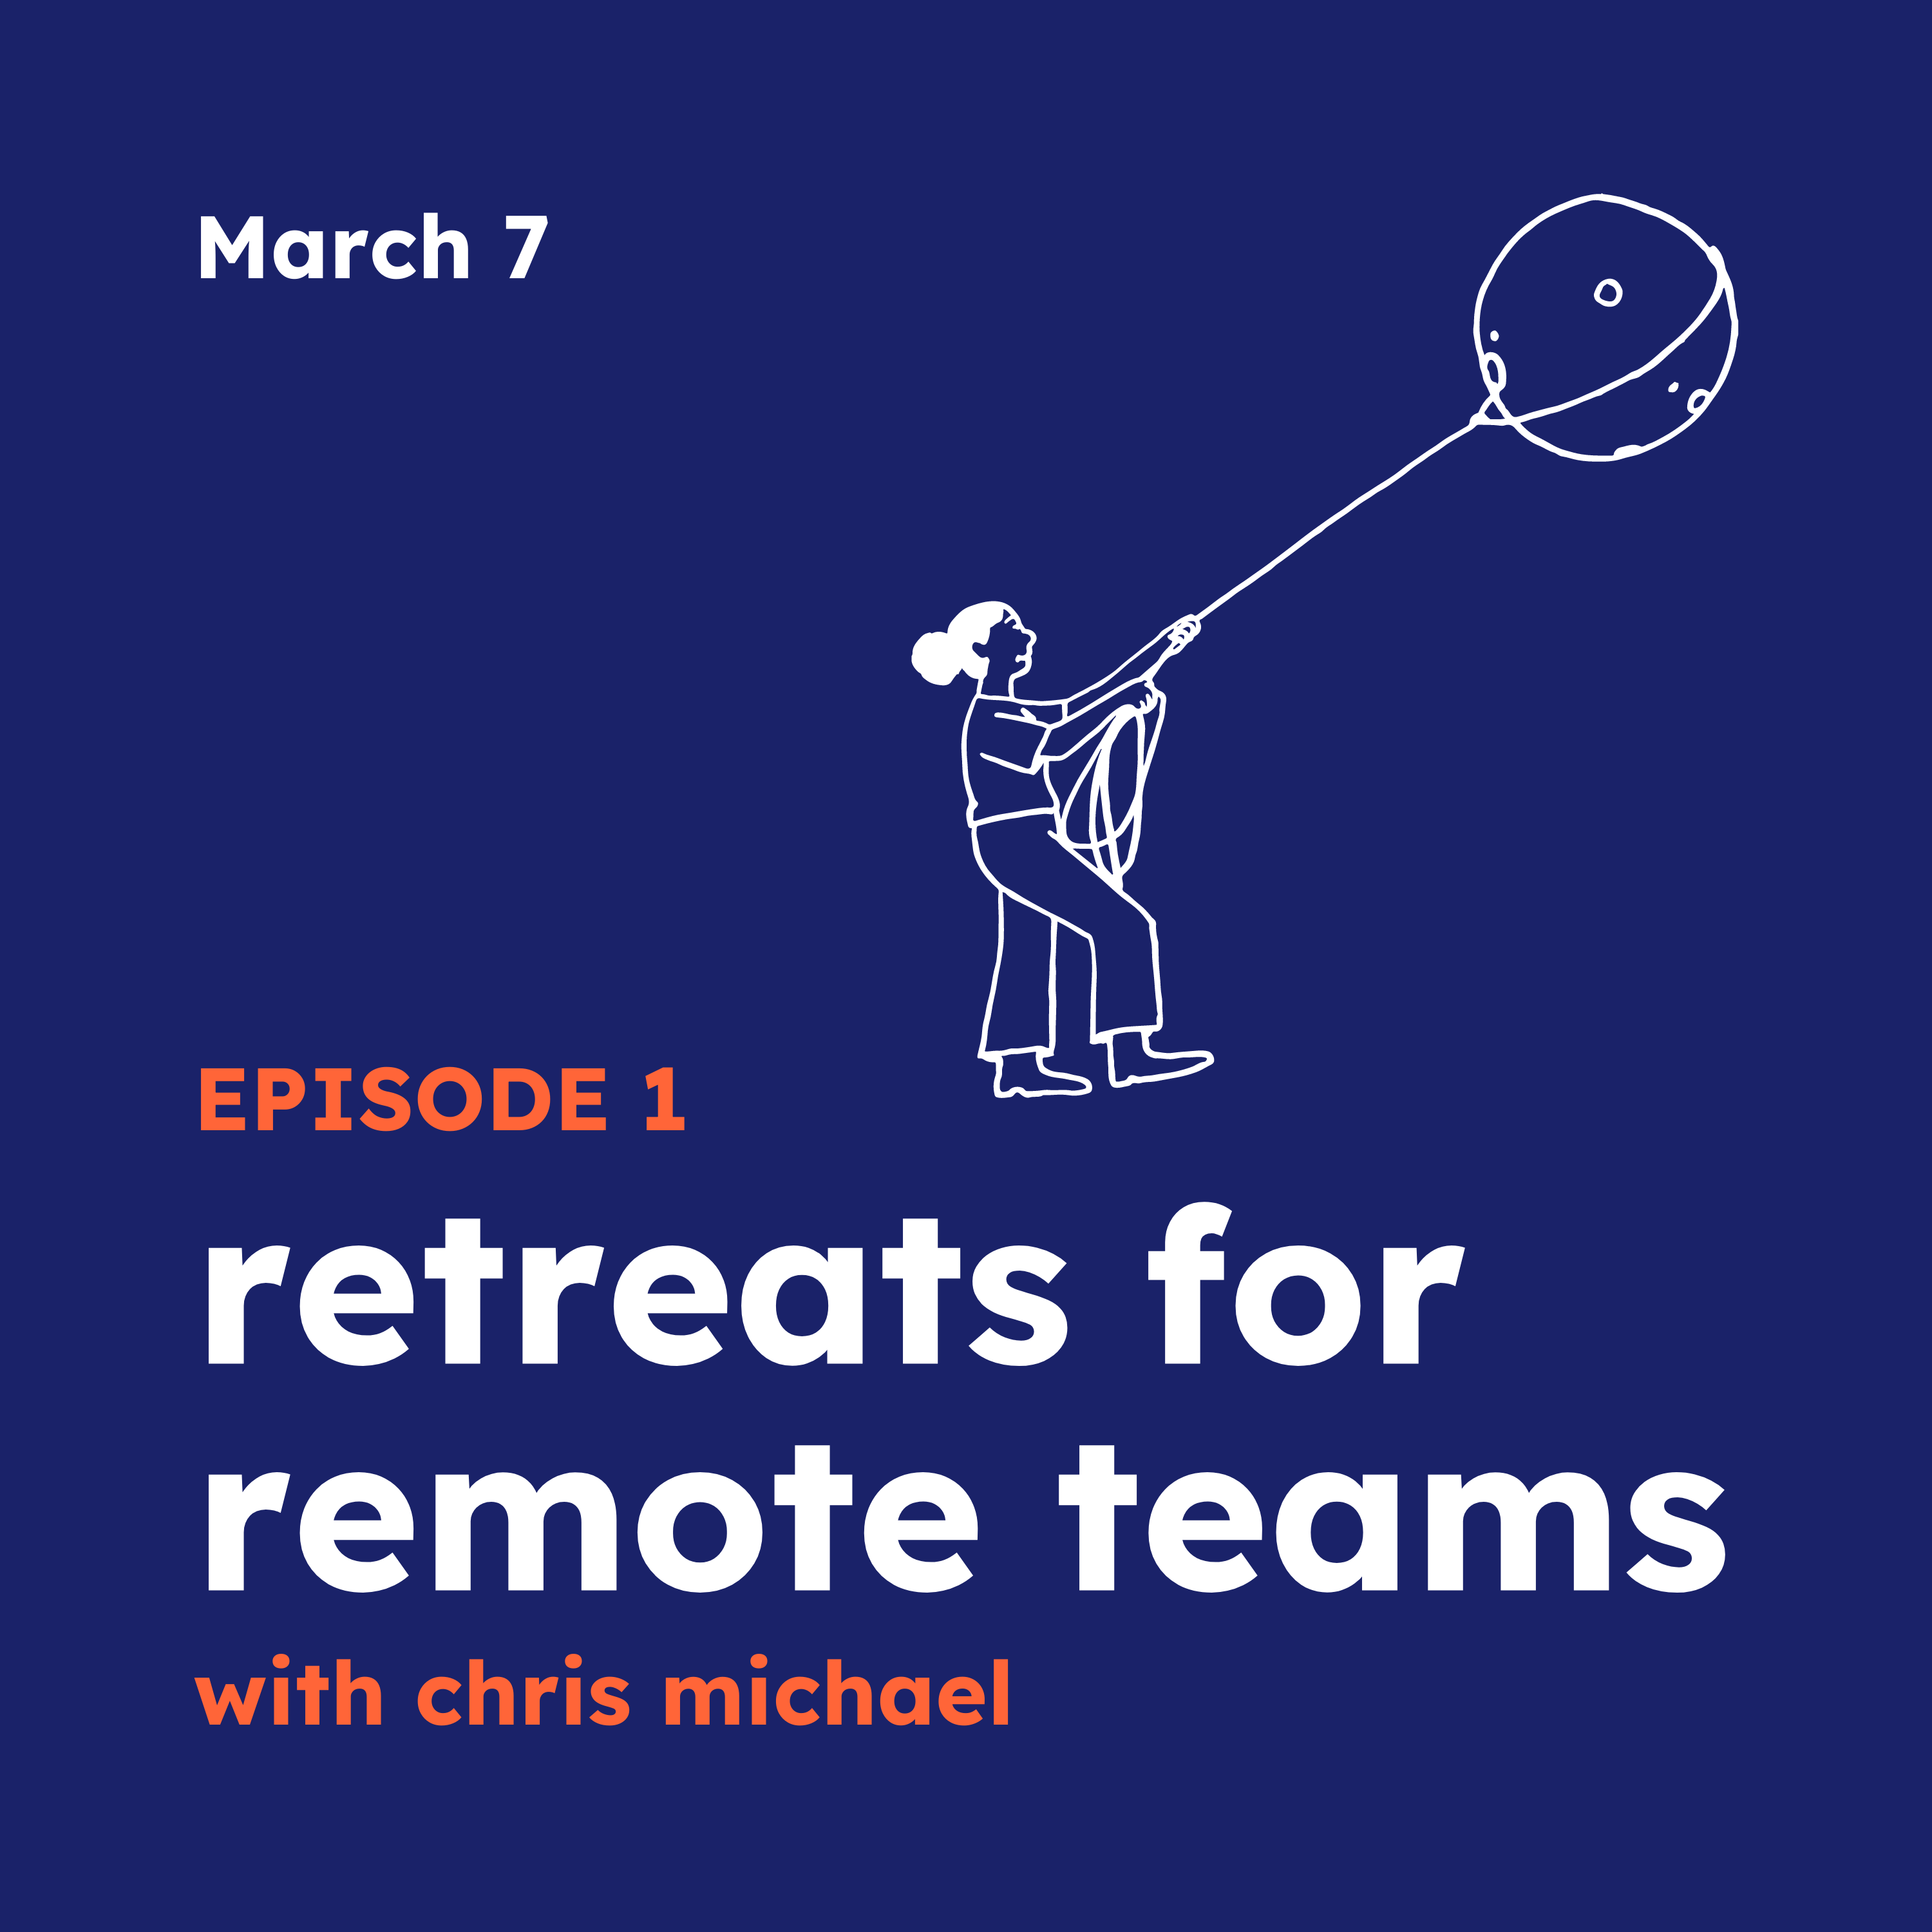 Episode 1 | Retreats for remote teams with Chris Michael